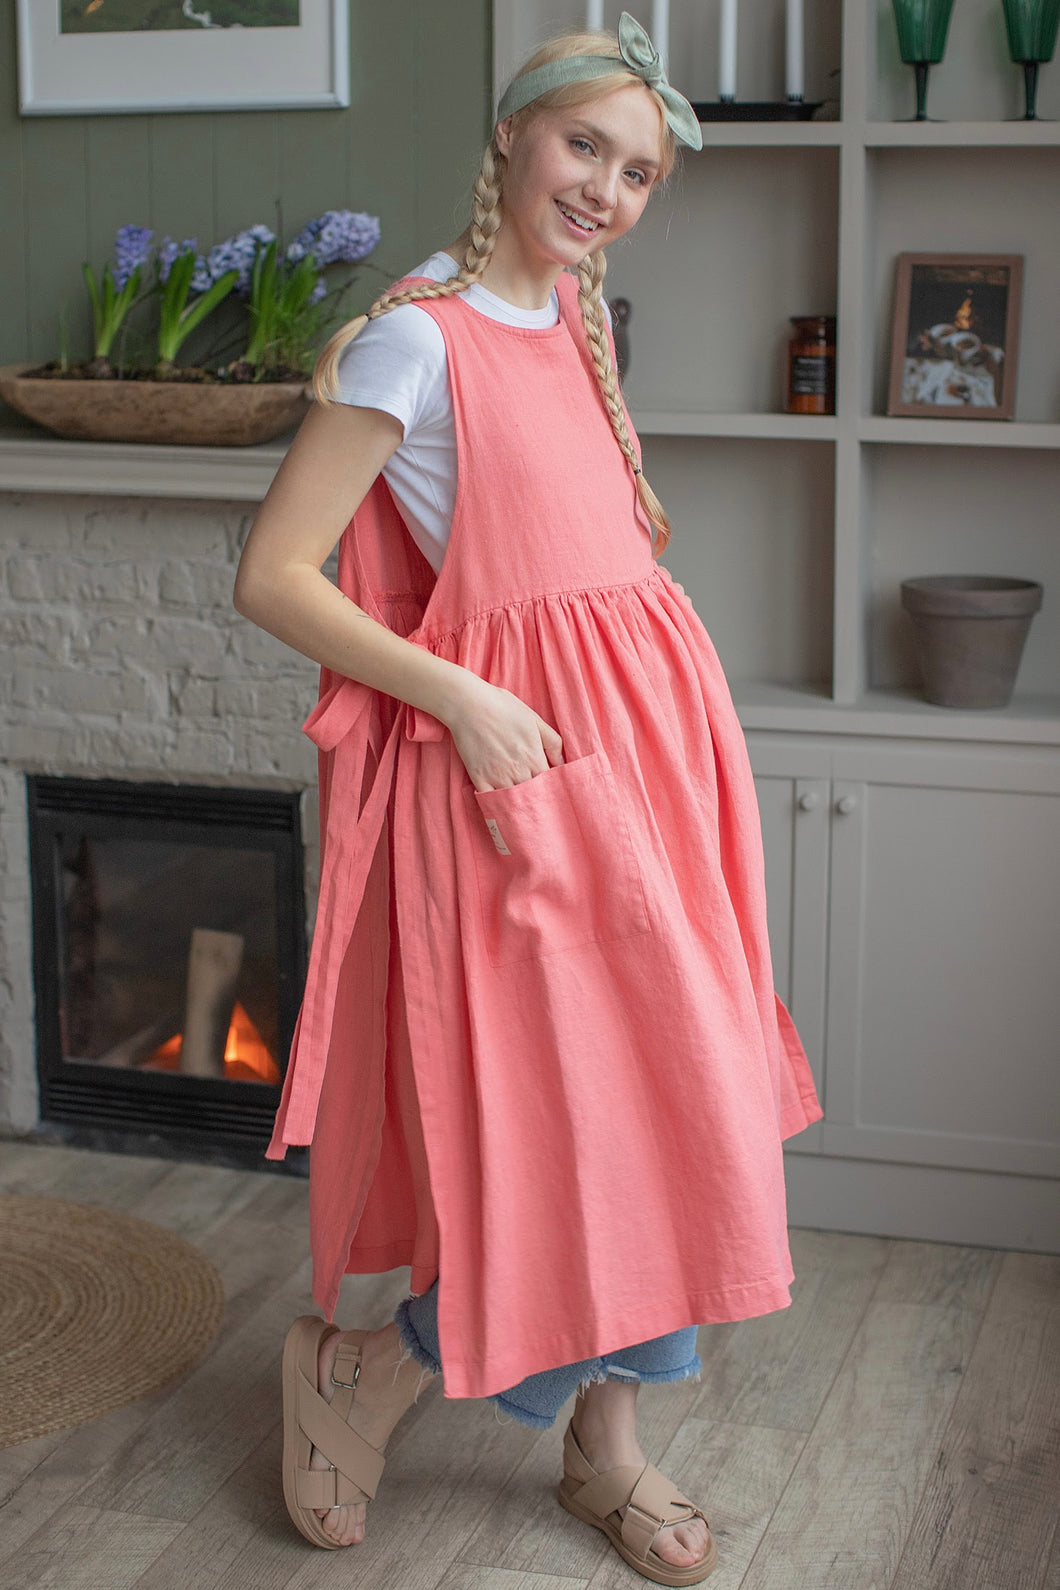 Copy of 100% Linen Cottage Dress Apron in Coral